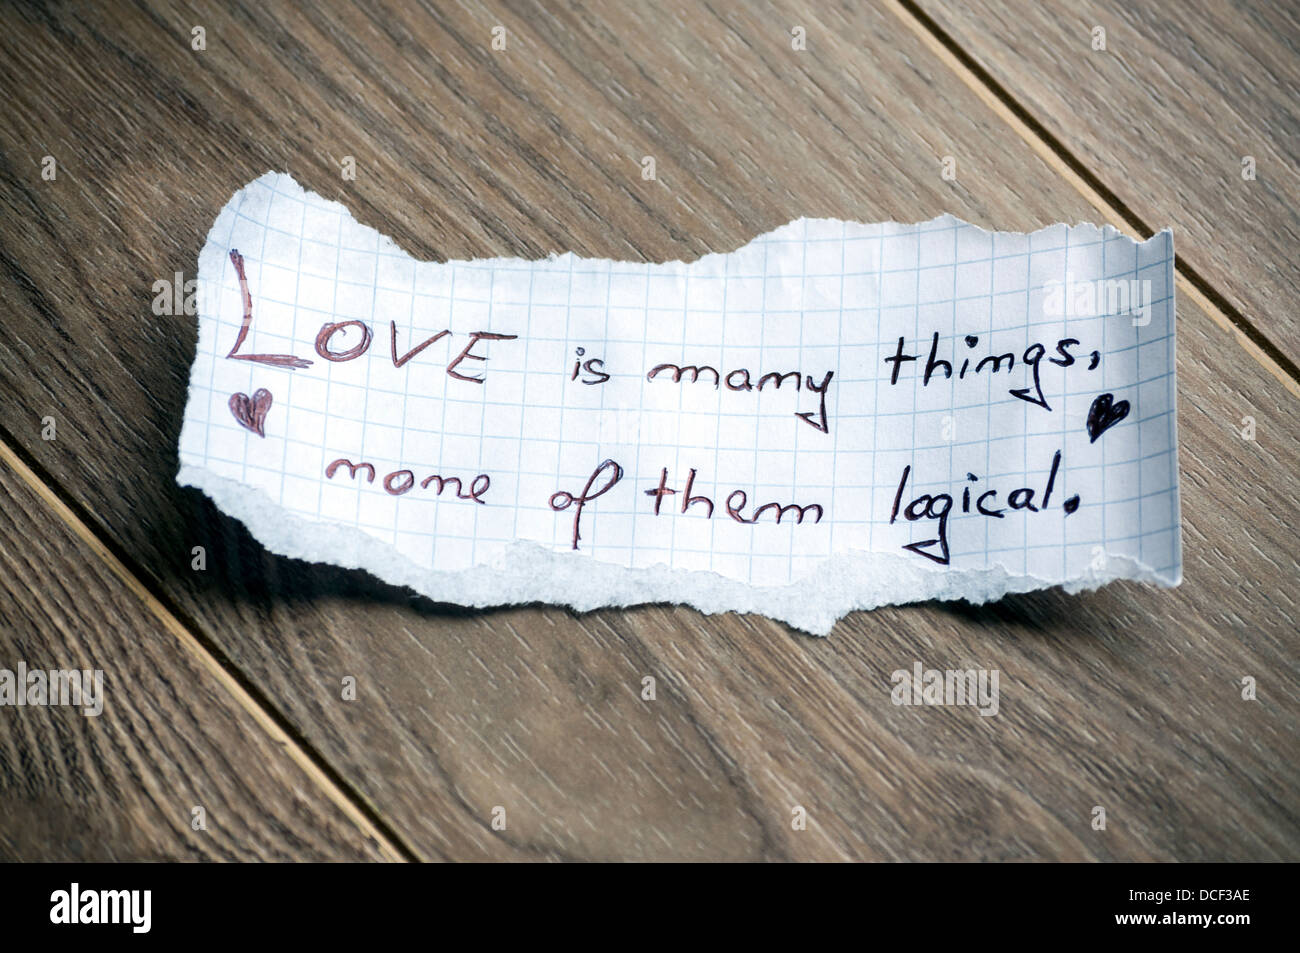 Love is many things, none of them logical (Quote by William Goldman) - Hand writing text on a piece of paper on wood background Stock Photo